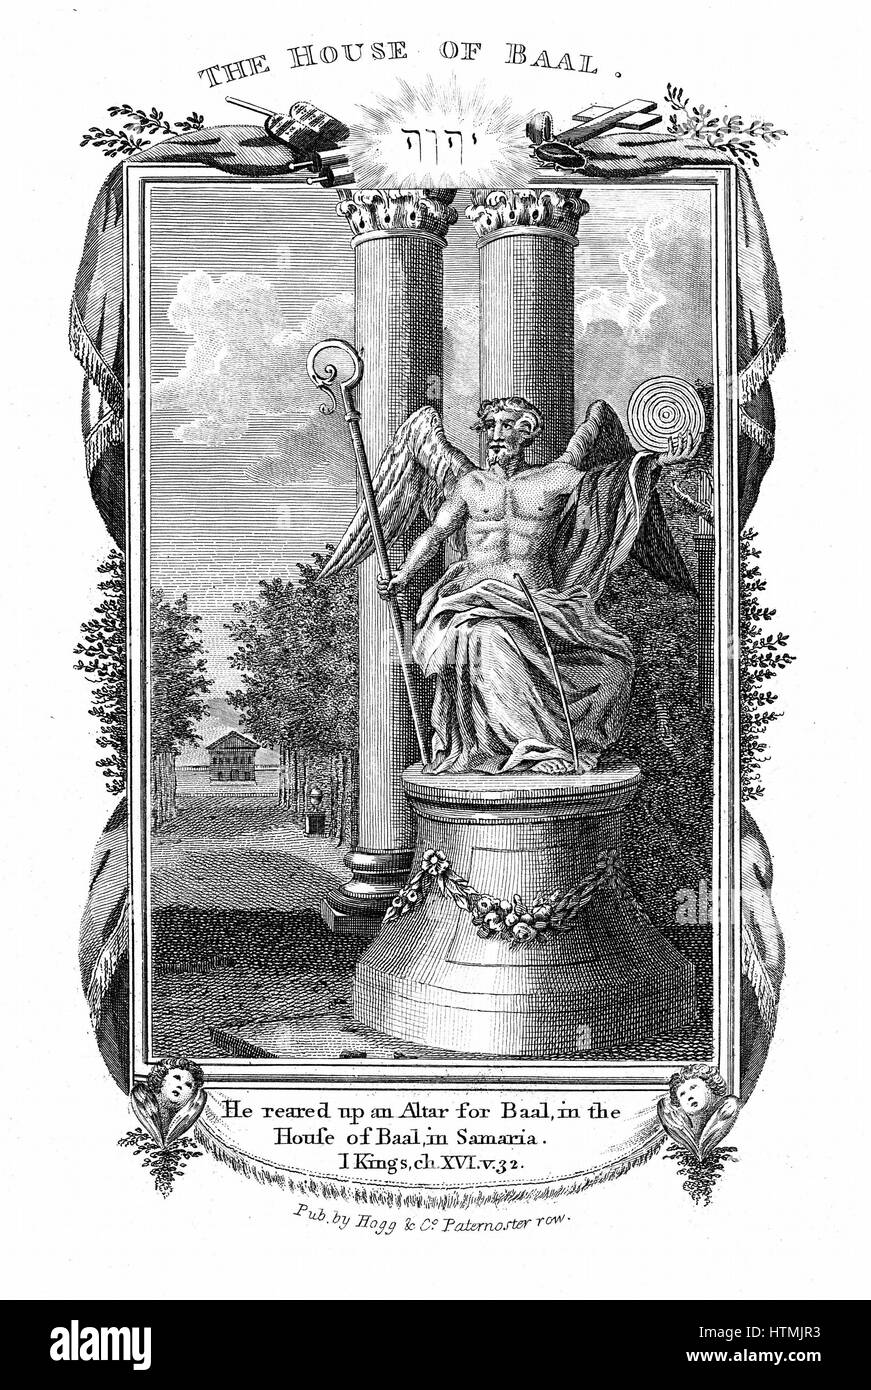 Baal, god of fertility and king of the gods of the Canaanites. 'He reared up an altar for Baal, in the house of Baal , in Samaria'. I Kings 16:32 From evangelical 'Bible' published c.1804. Engraving. Stock Photo